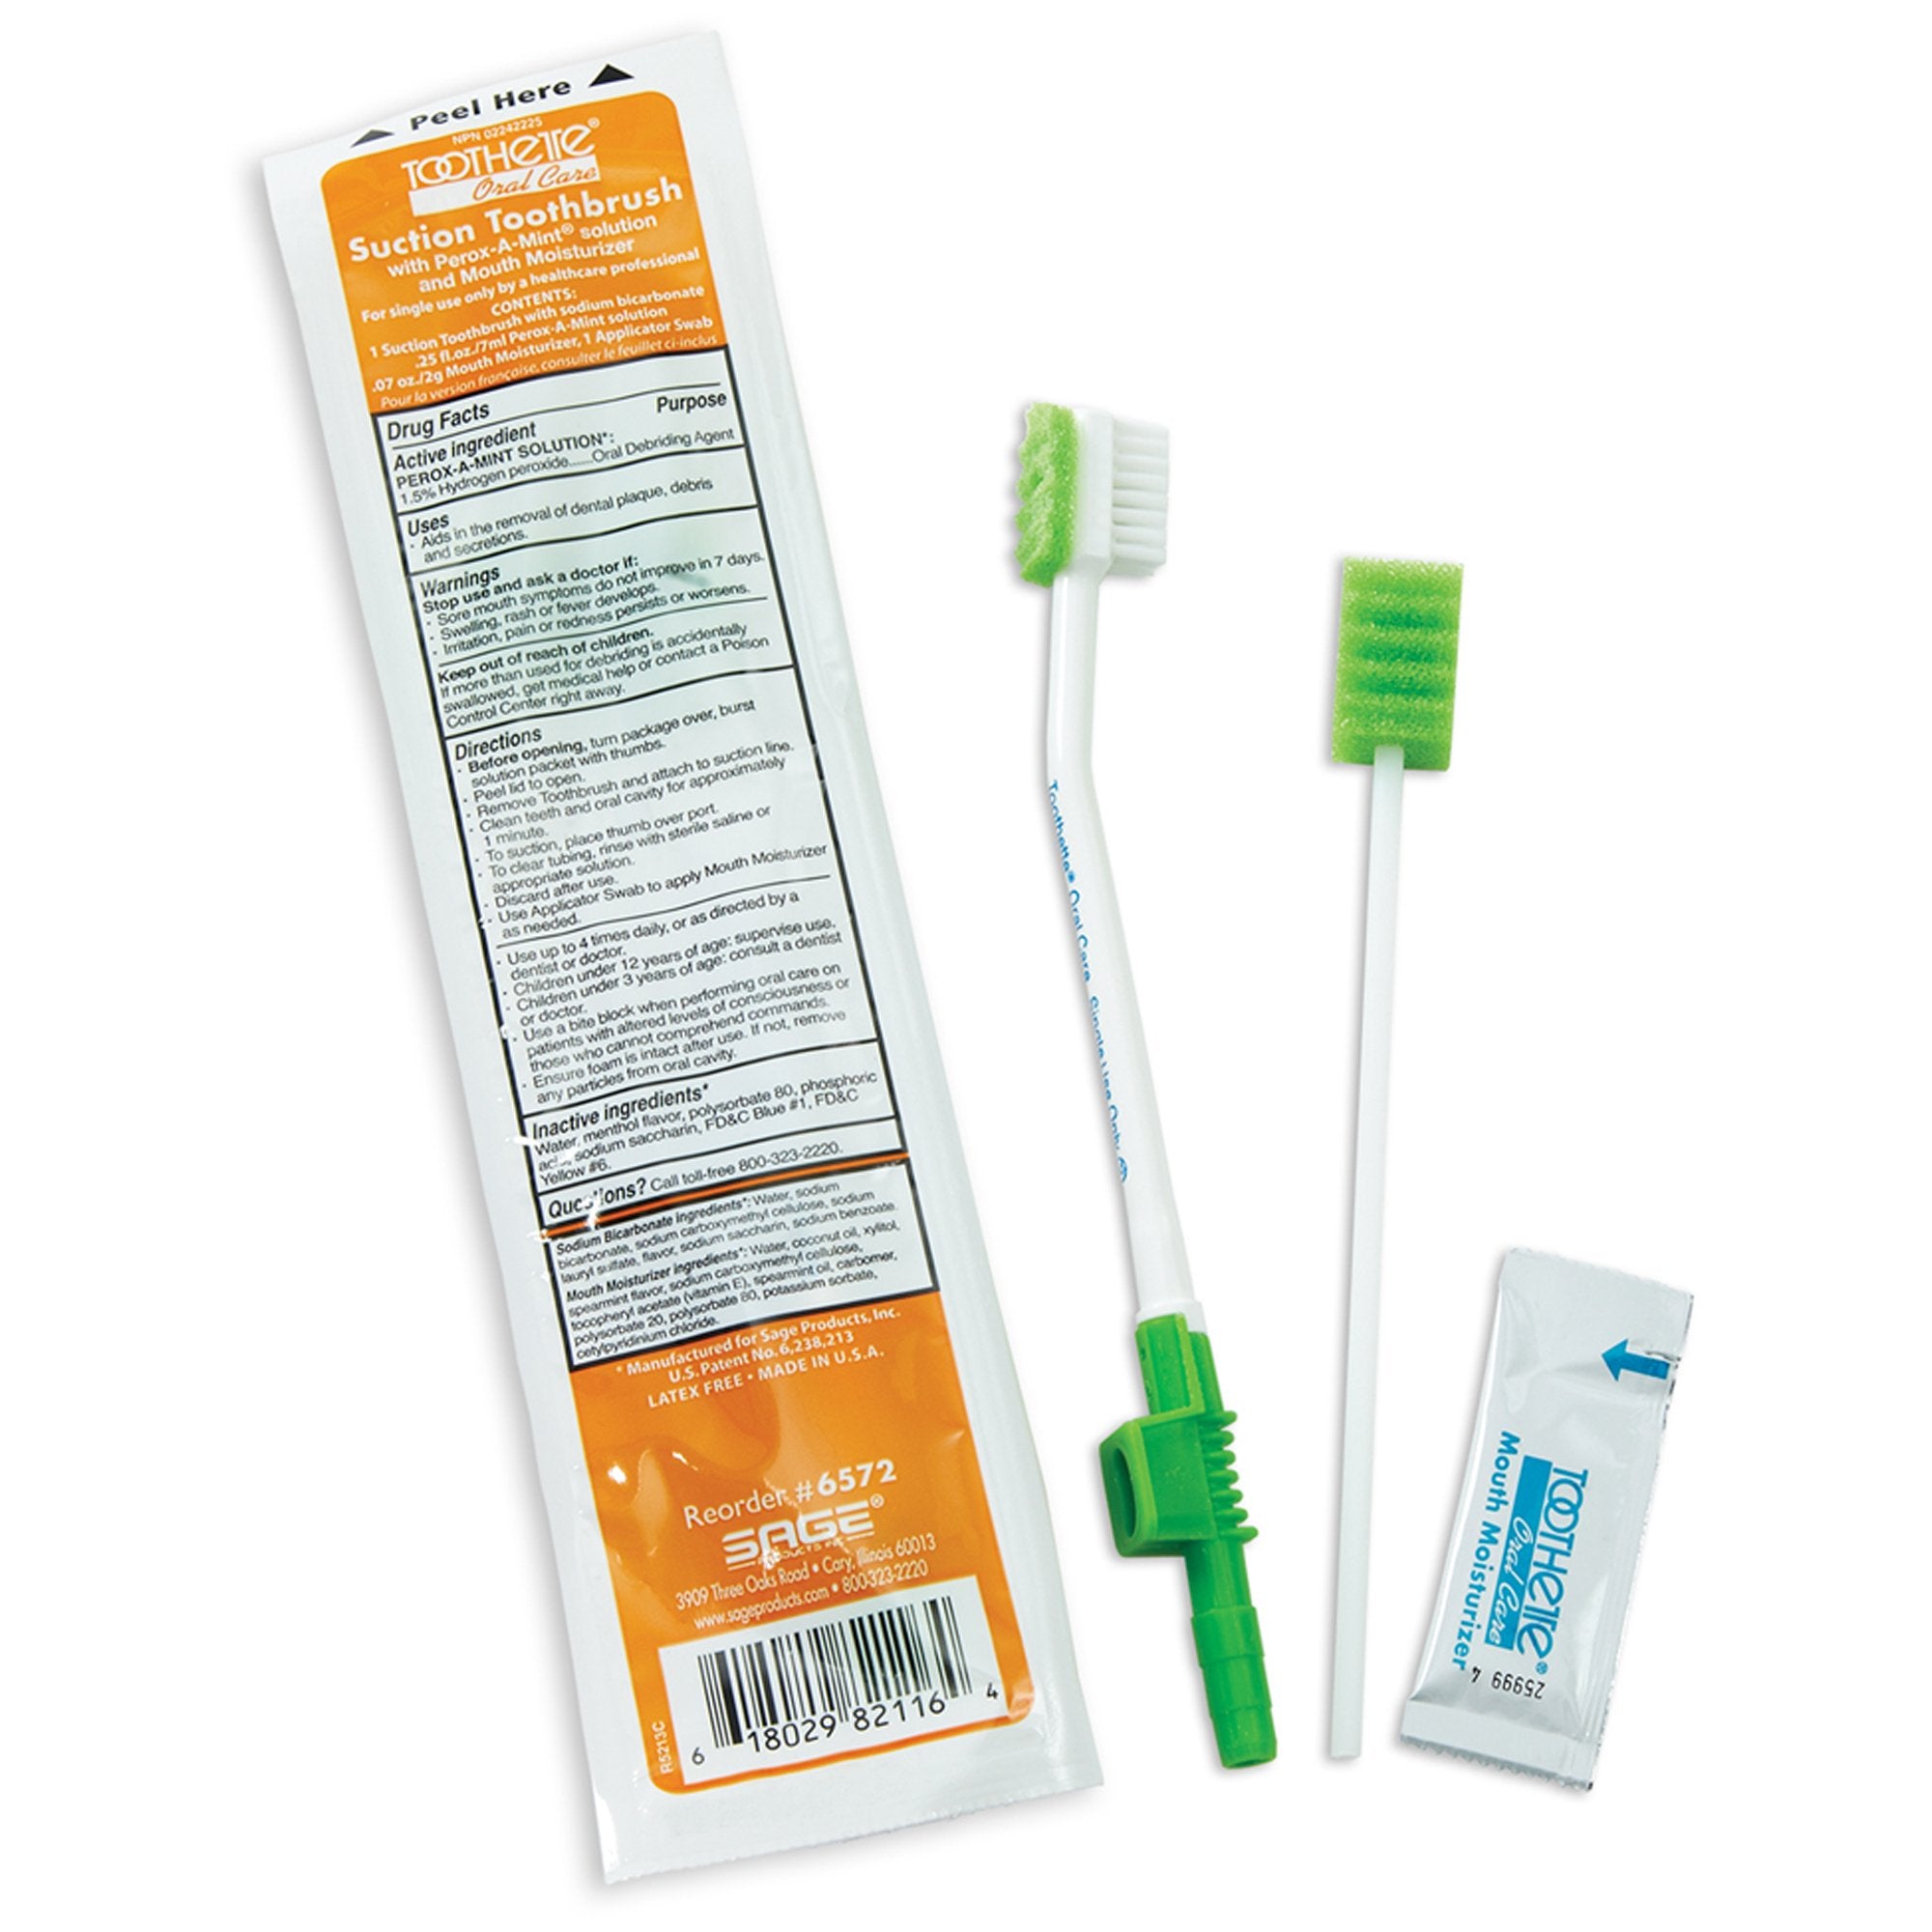 Personal Care>Mouth Care>Mouth Care Kits - McKesson - Wasatch Medical Supply